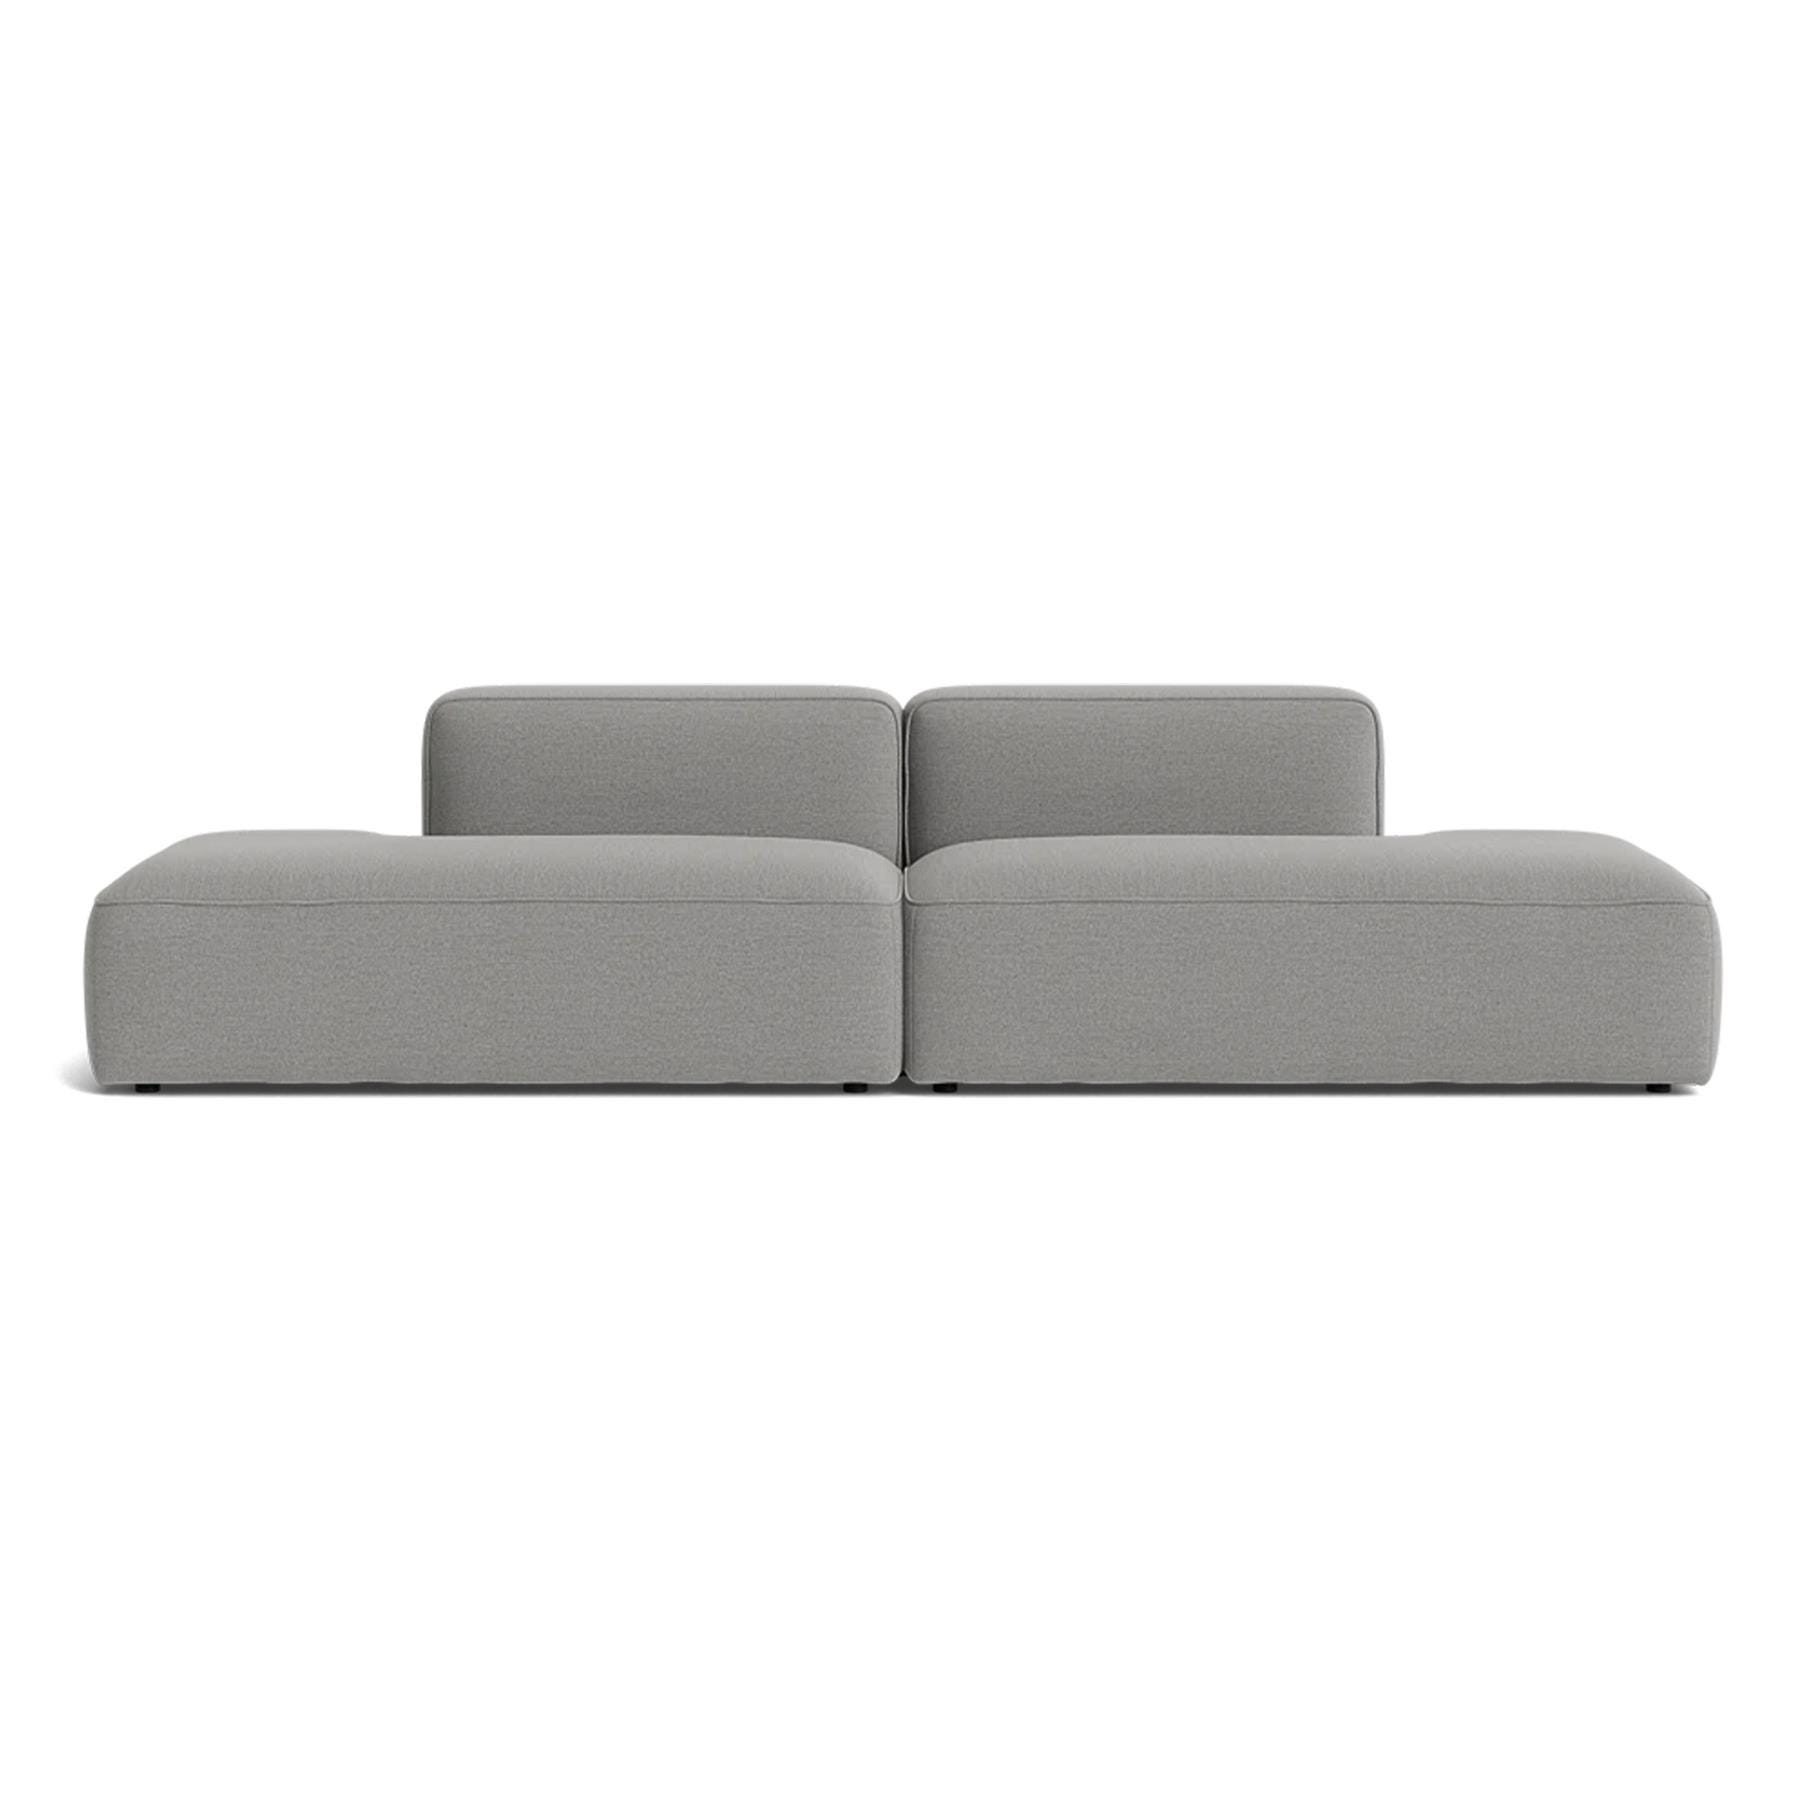 Make Nordic Basecamp Xl Sofa With 2 Open Ends Rewool 128 Grey Designer Furniture From Holloways Of Ludlow